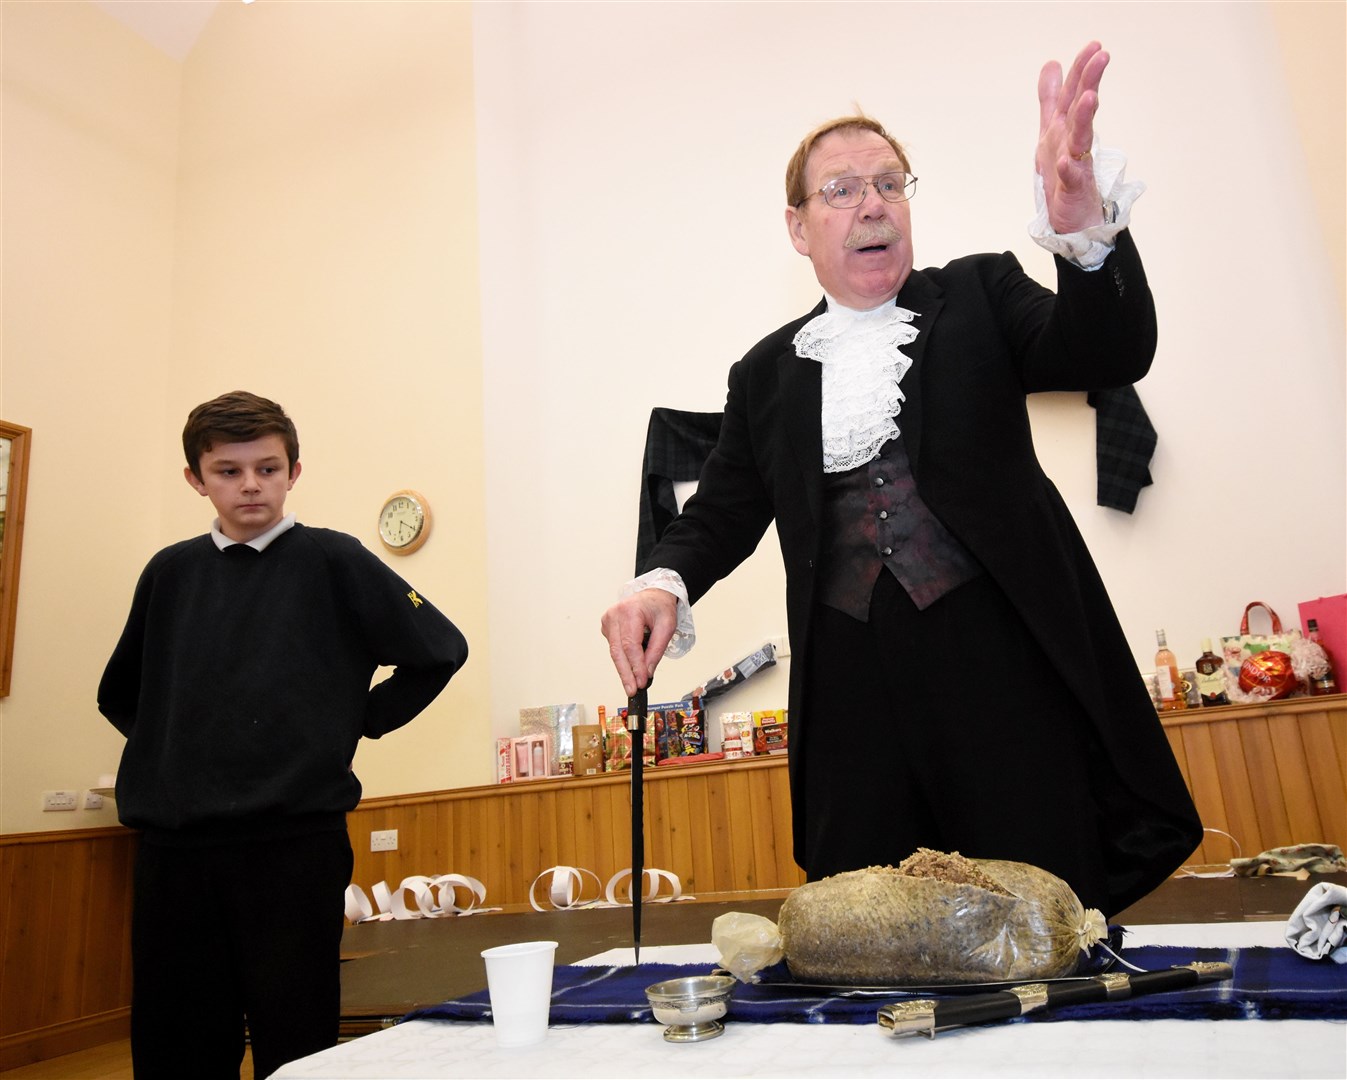 The late John Sievwright addressing the haggis at the Botriphnie Burns Supper.